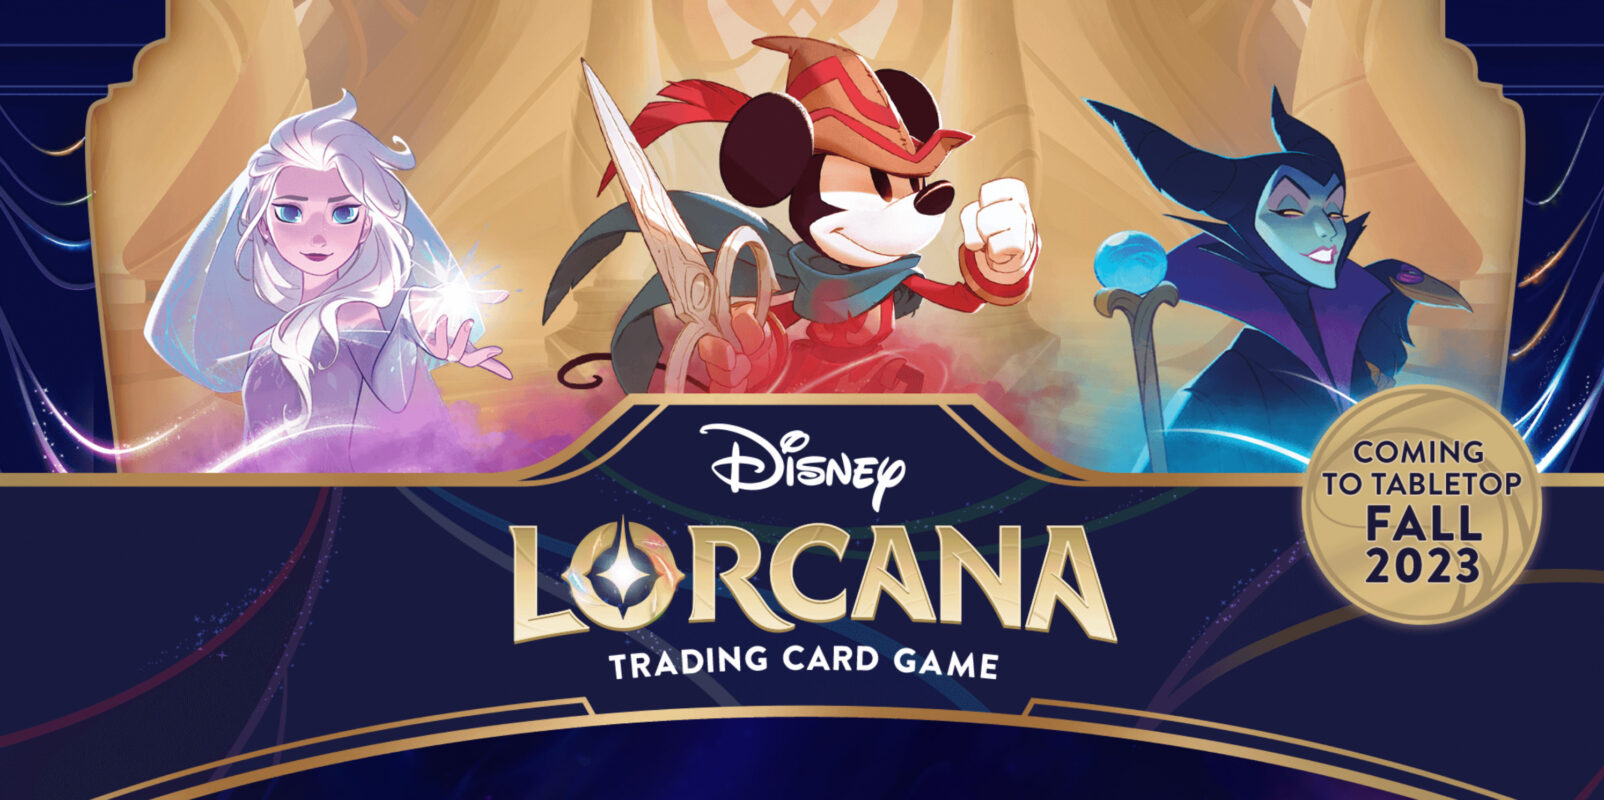 Lorcana Promotional Banner with Disney Characters.